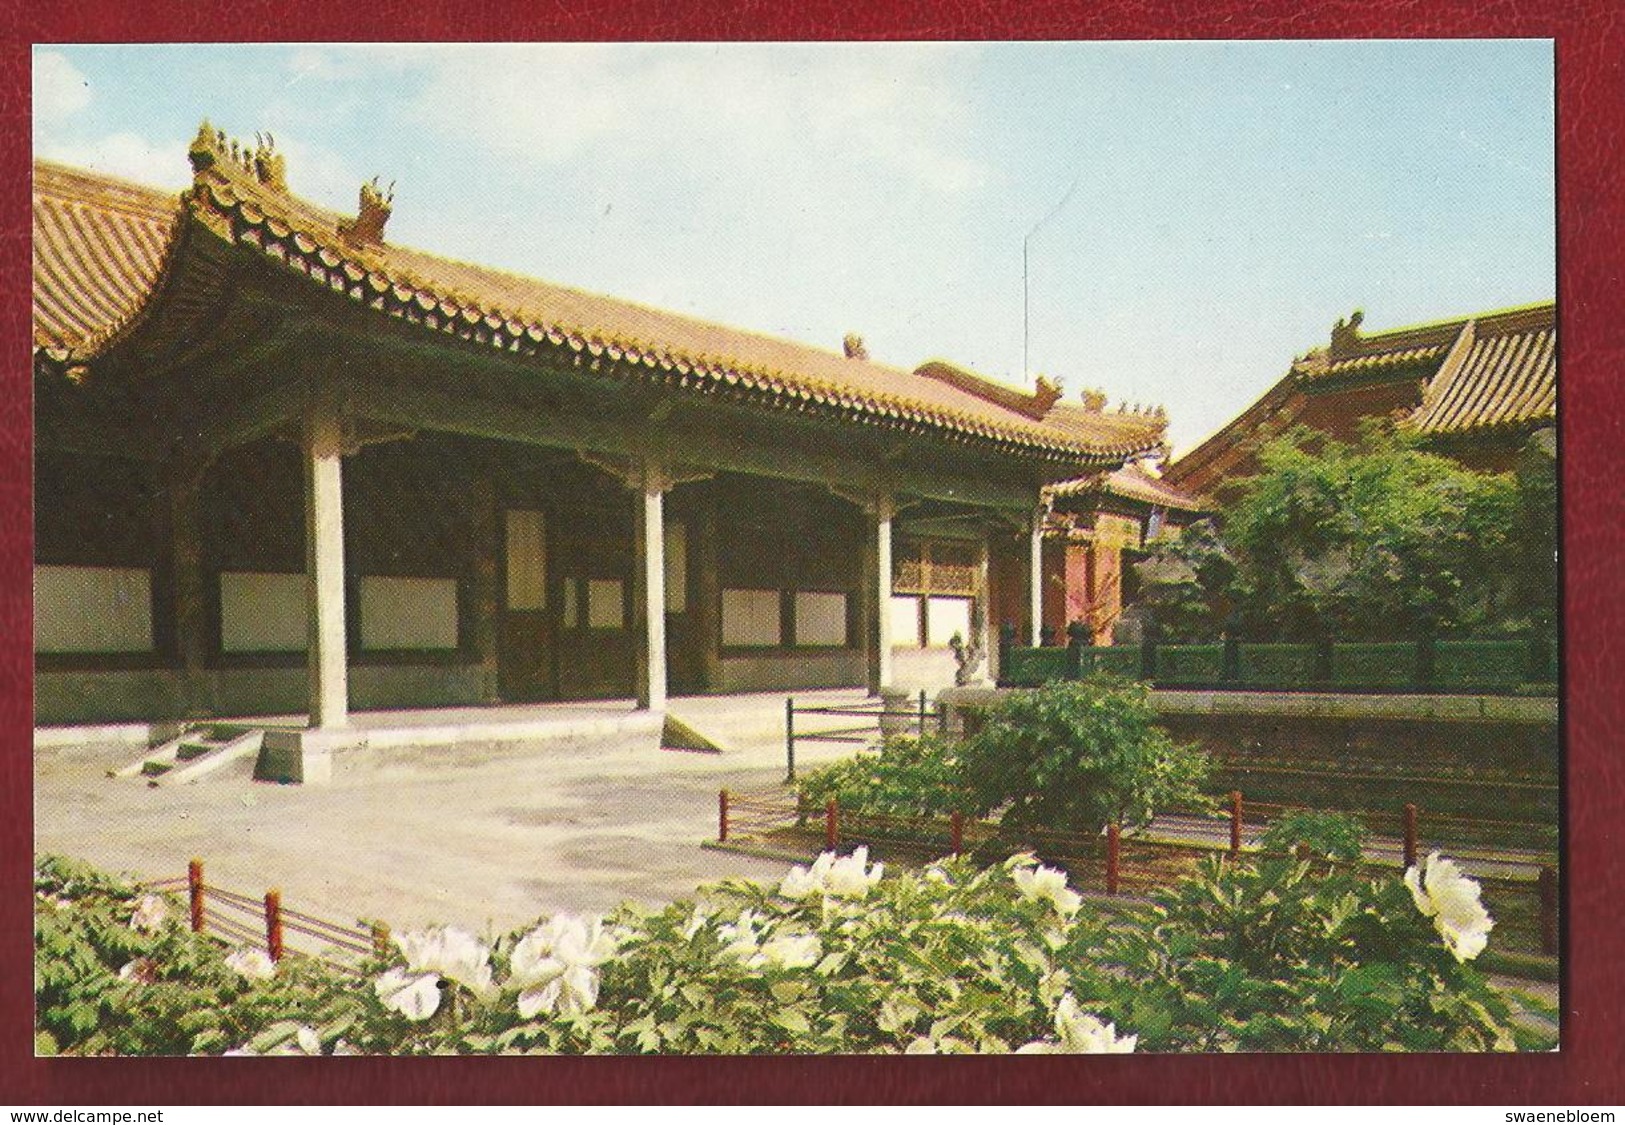 CN.- CHINA. IMPERIAL GARDEN In The FORMER IMPERIAL PALACES. PEKING. 10 Cards 1977. - Monumenten